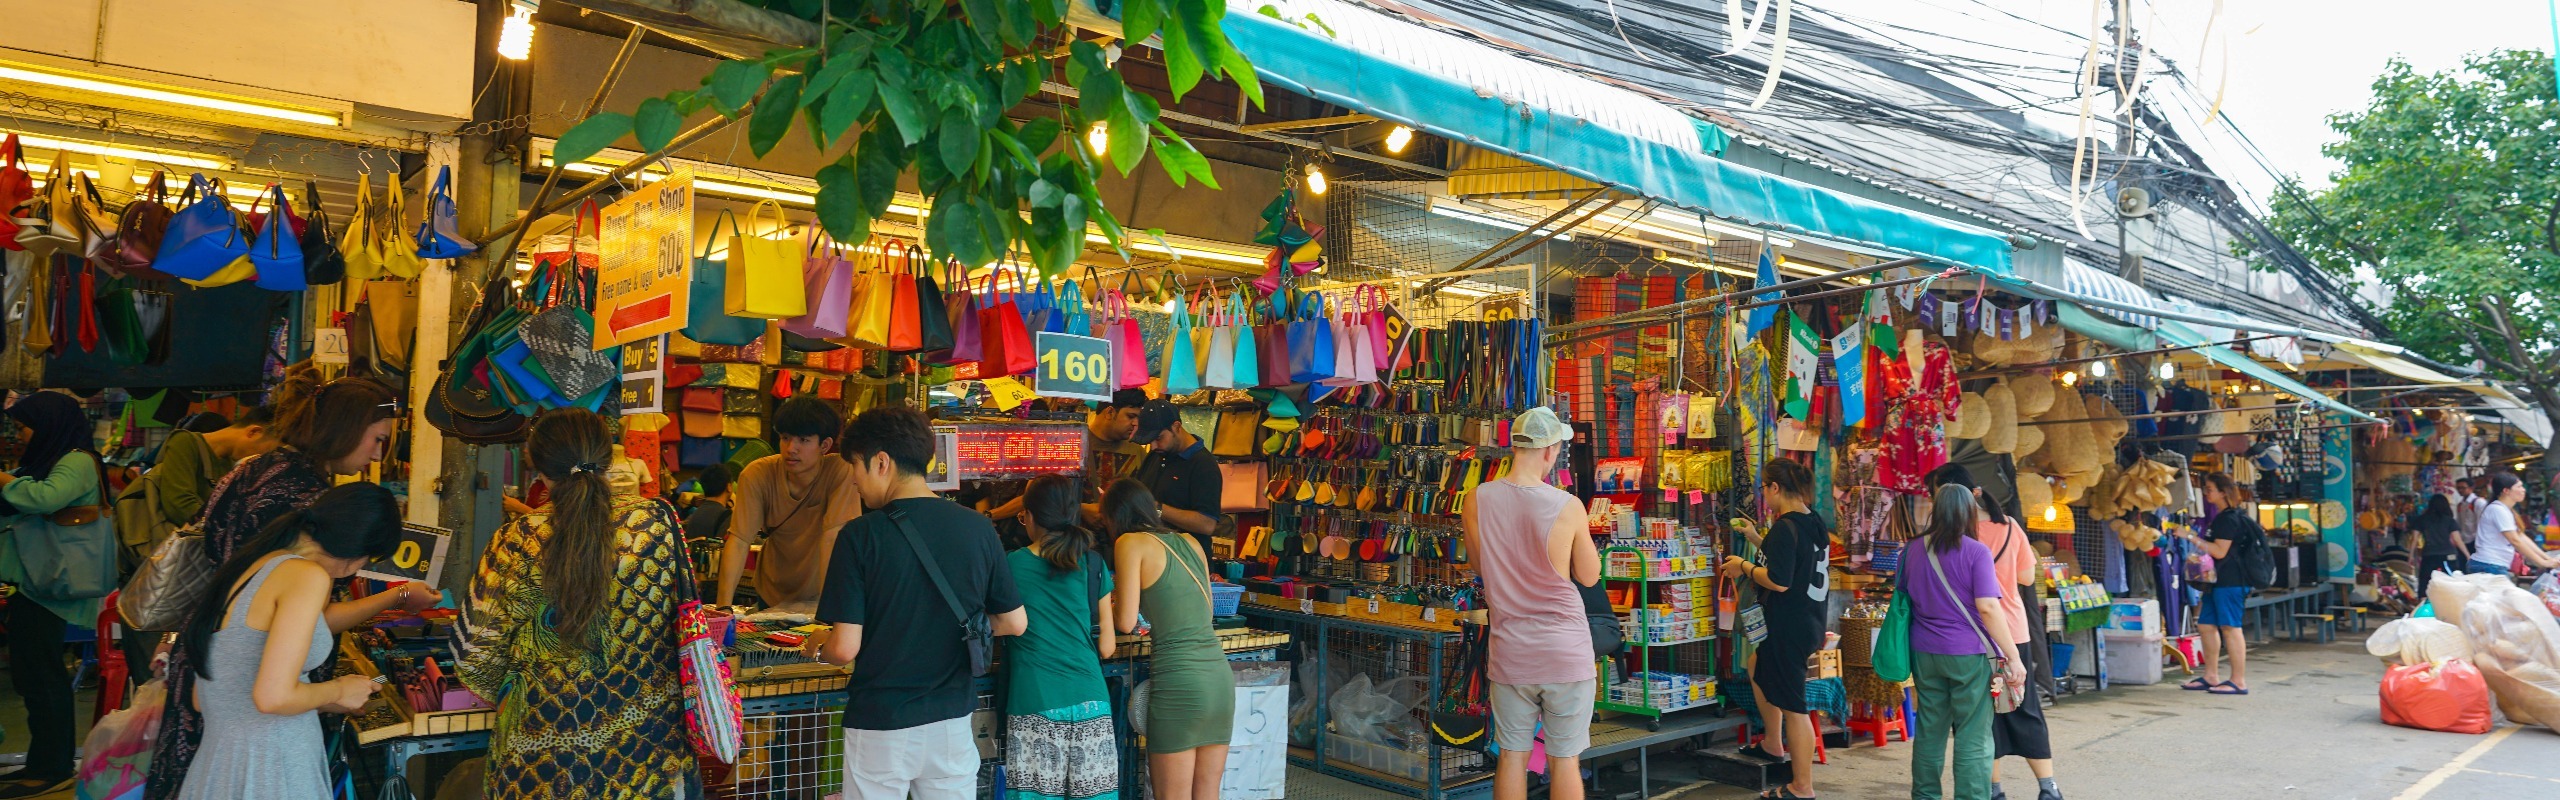 How Much Does a Thailand Trip Cost?